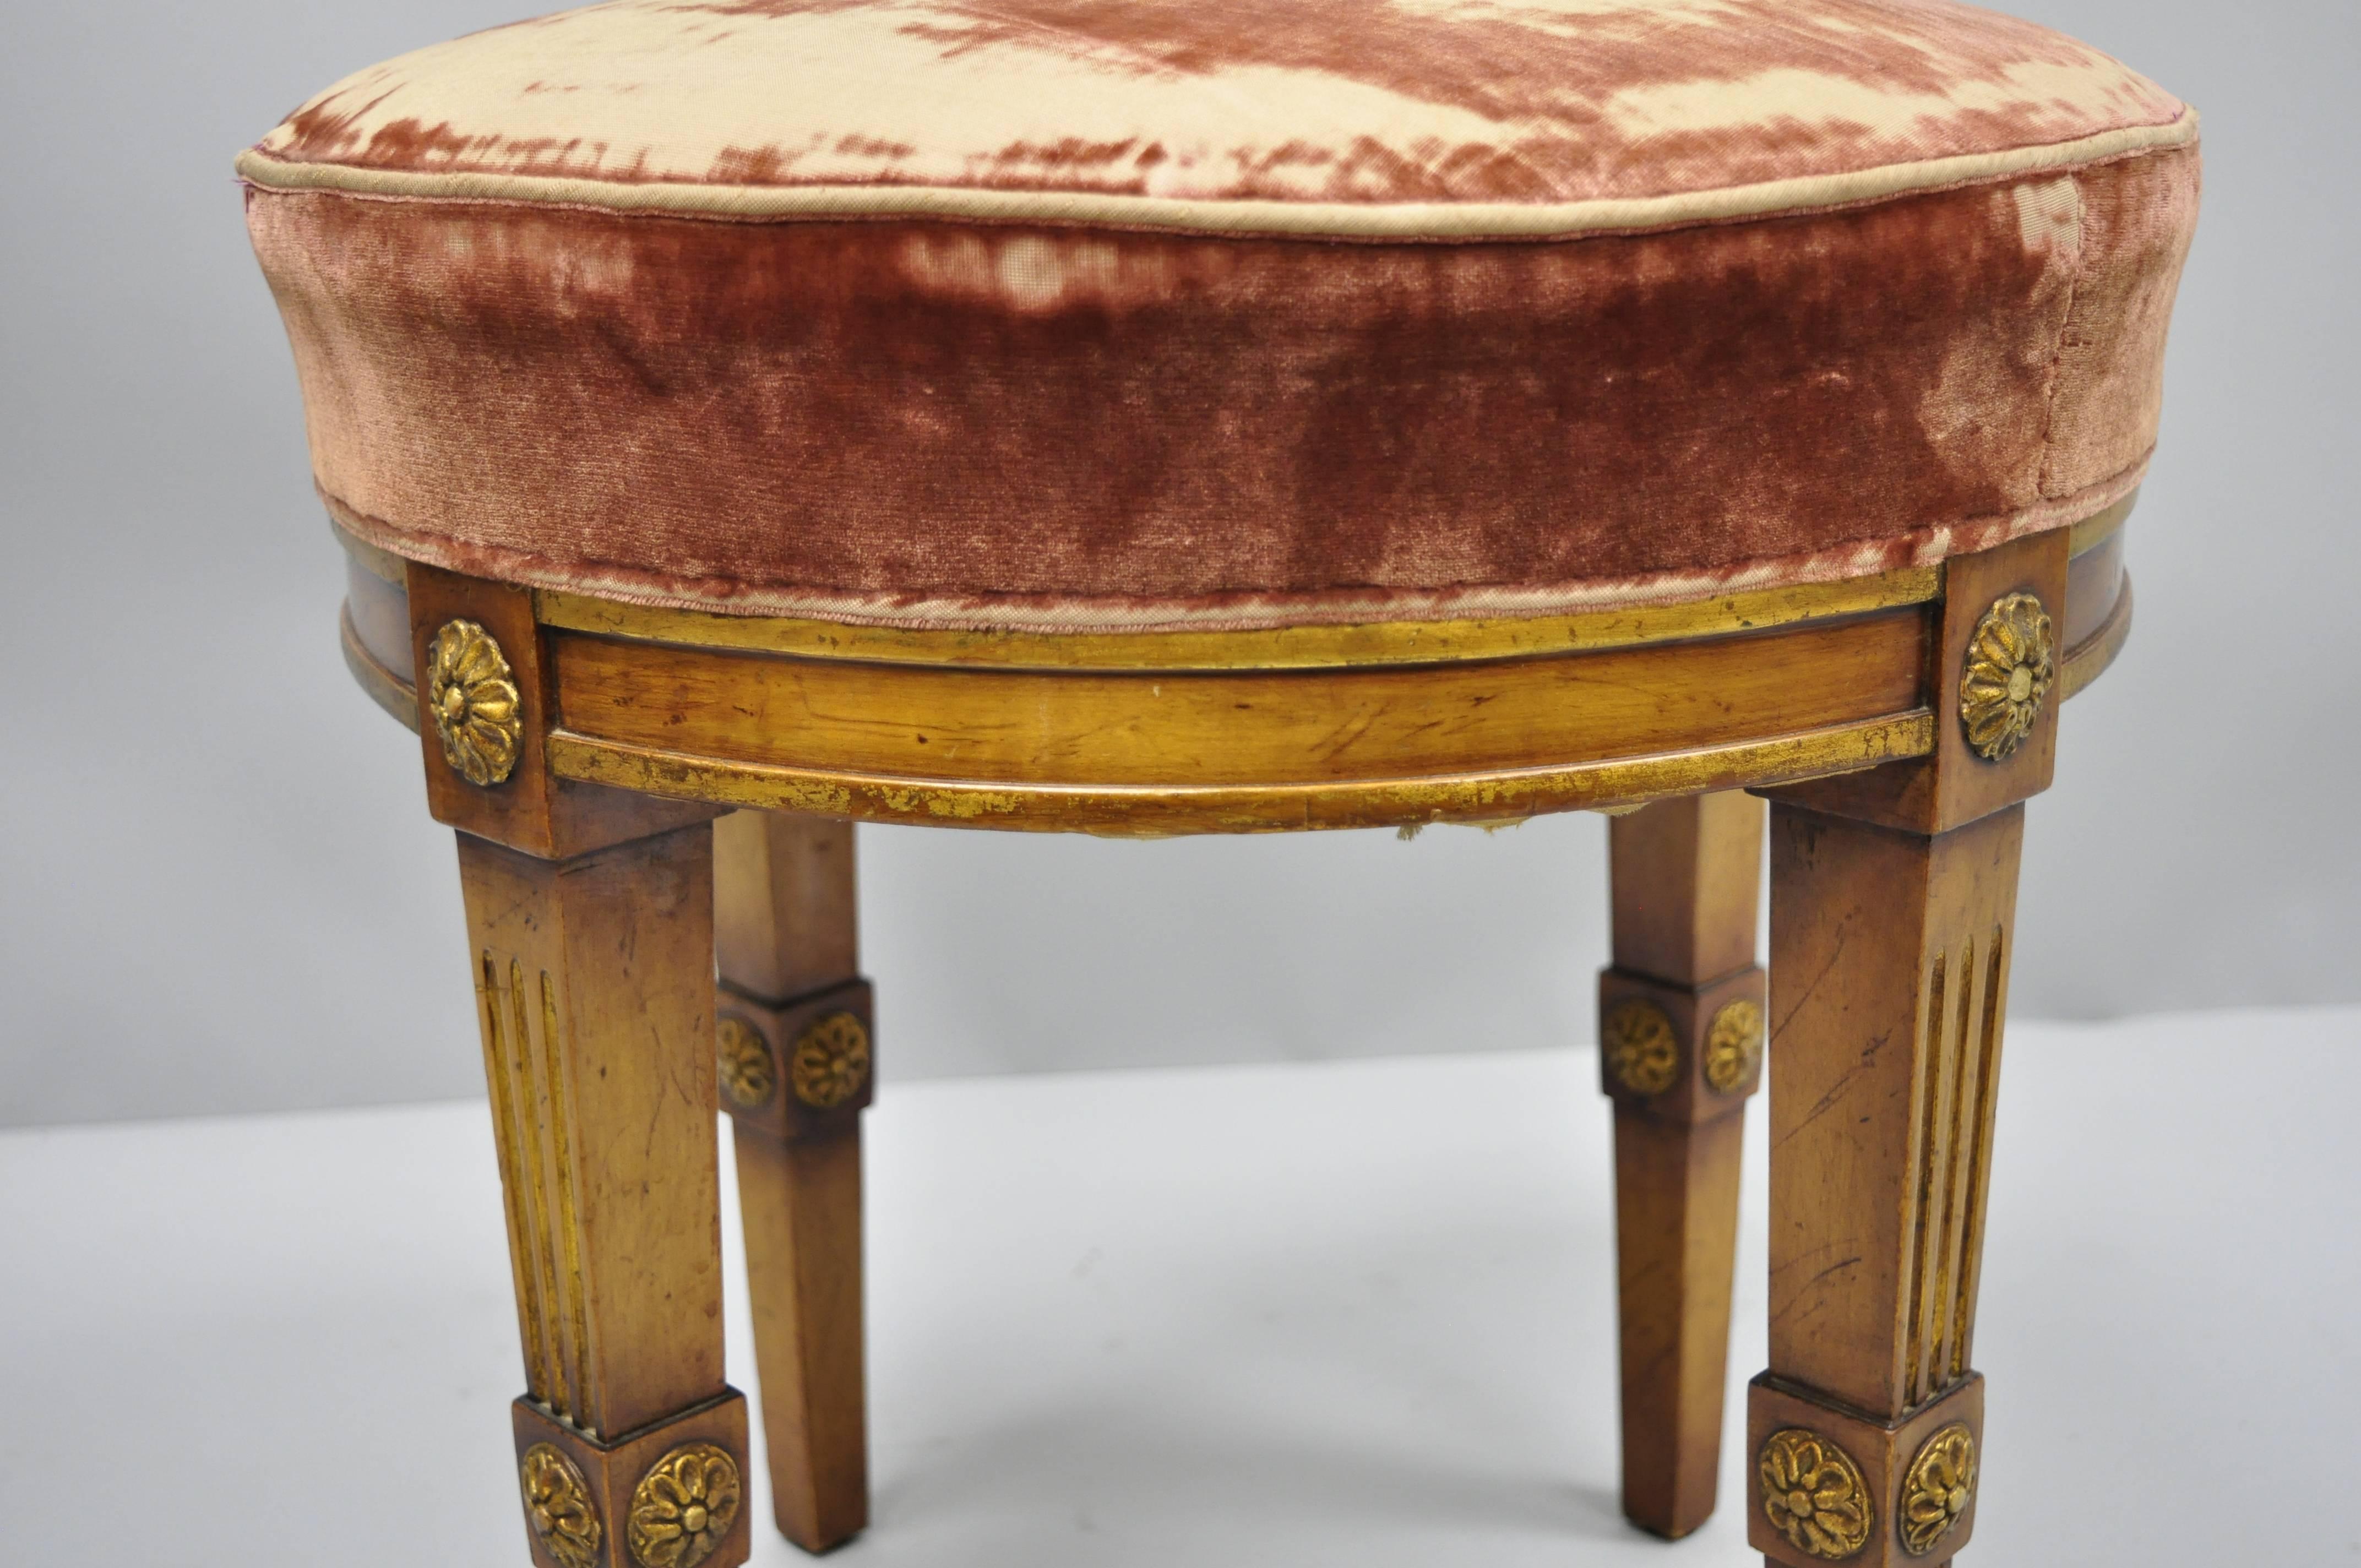 20th Century French Louis XVI Directoire Style Round Neoclassical Upholstered Vanity Stool